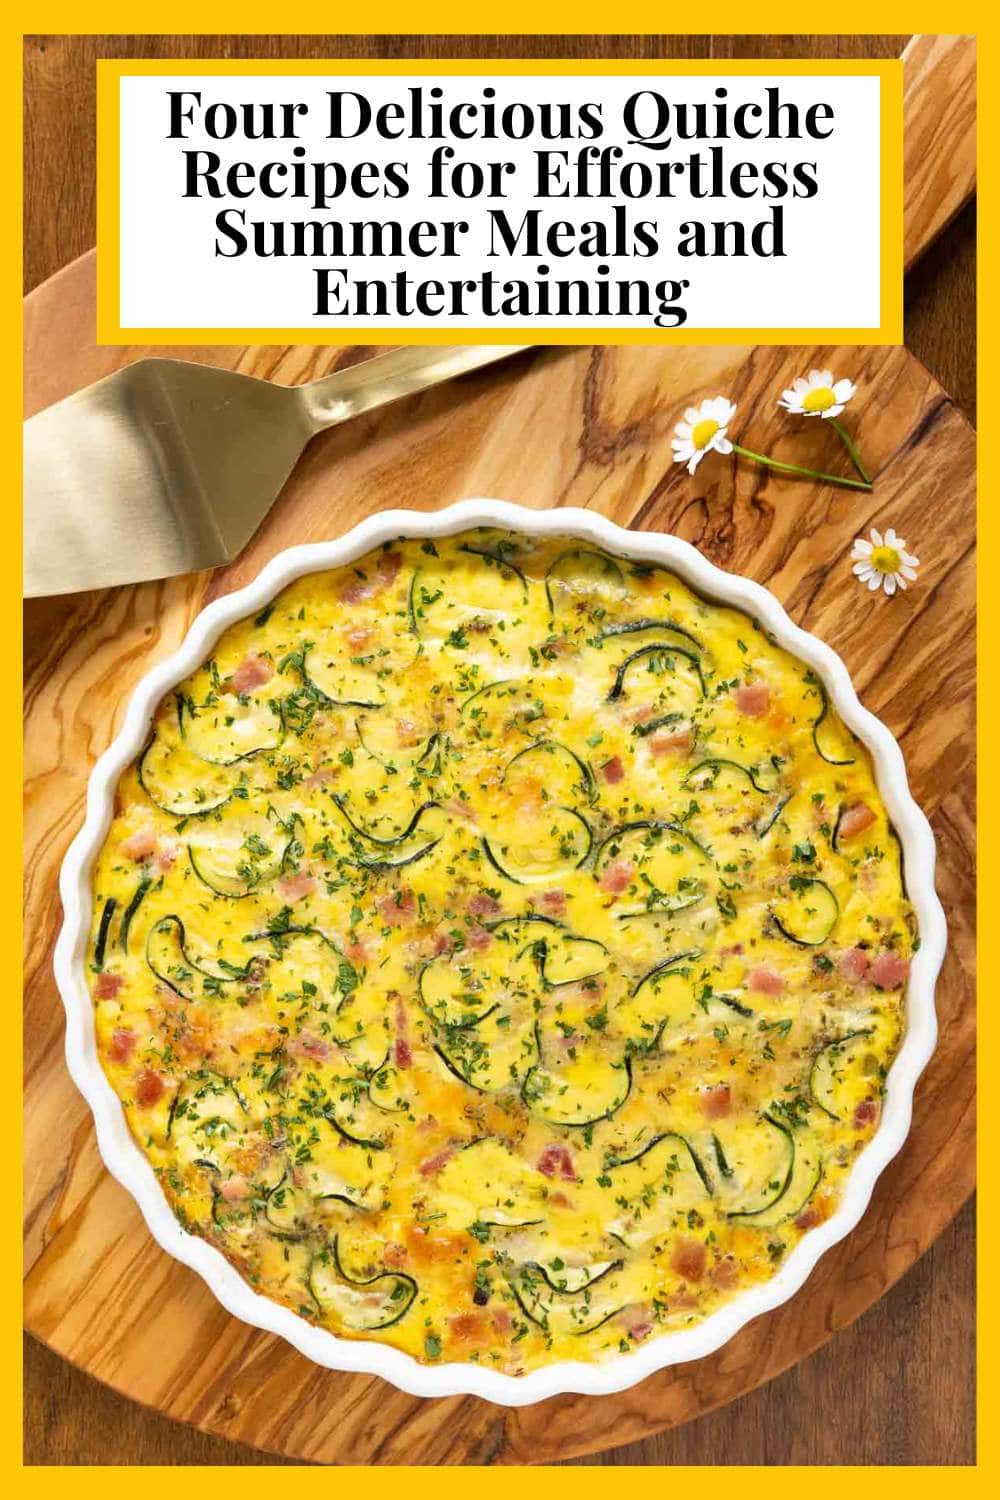 4 Delicious Quiche Recipes for Easy Summer Meals and Effortless Entertaining